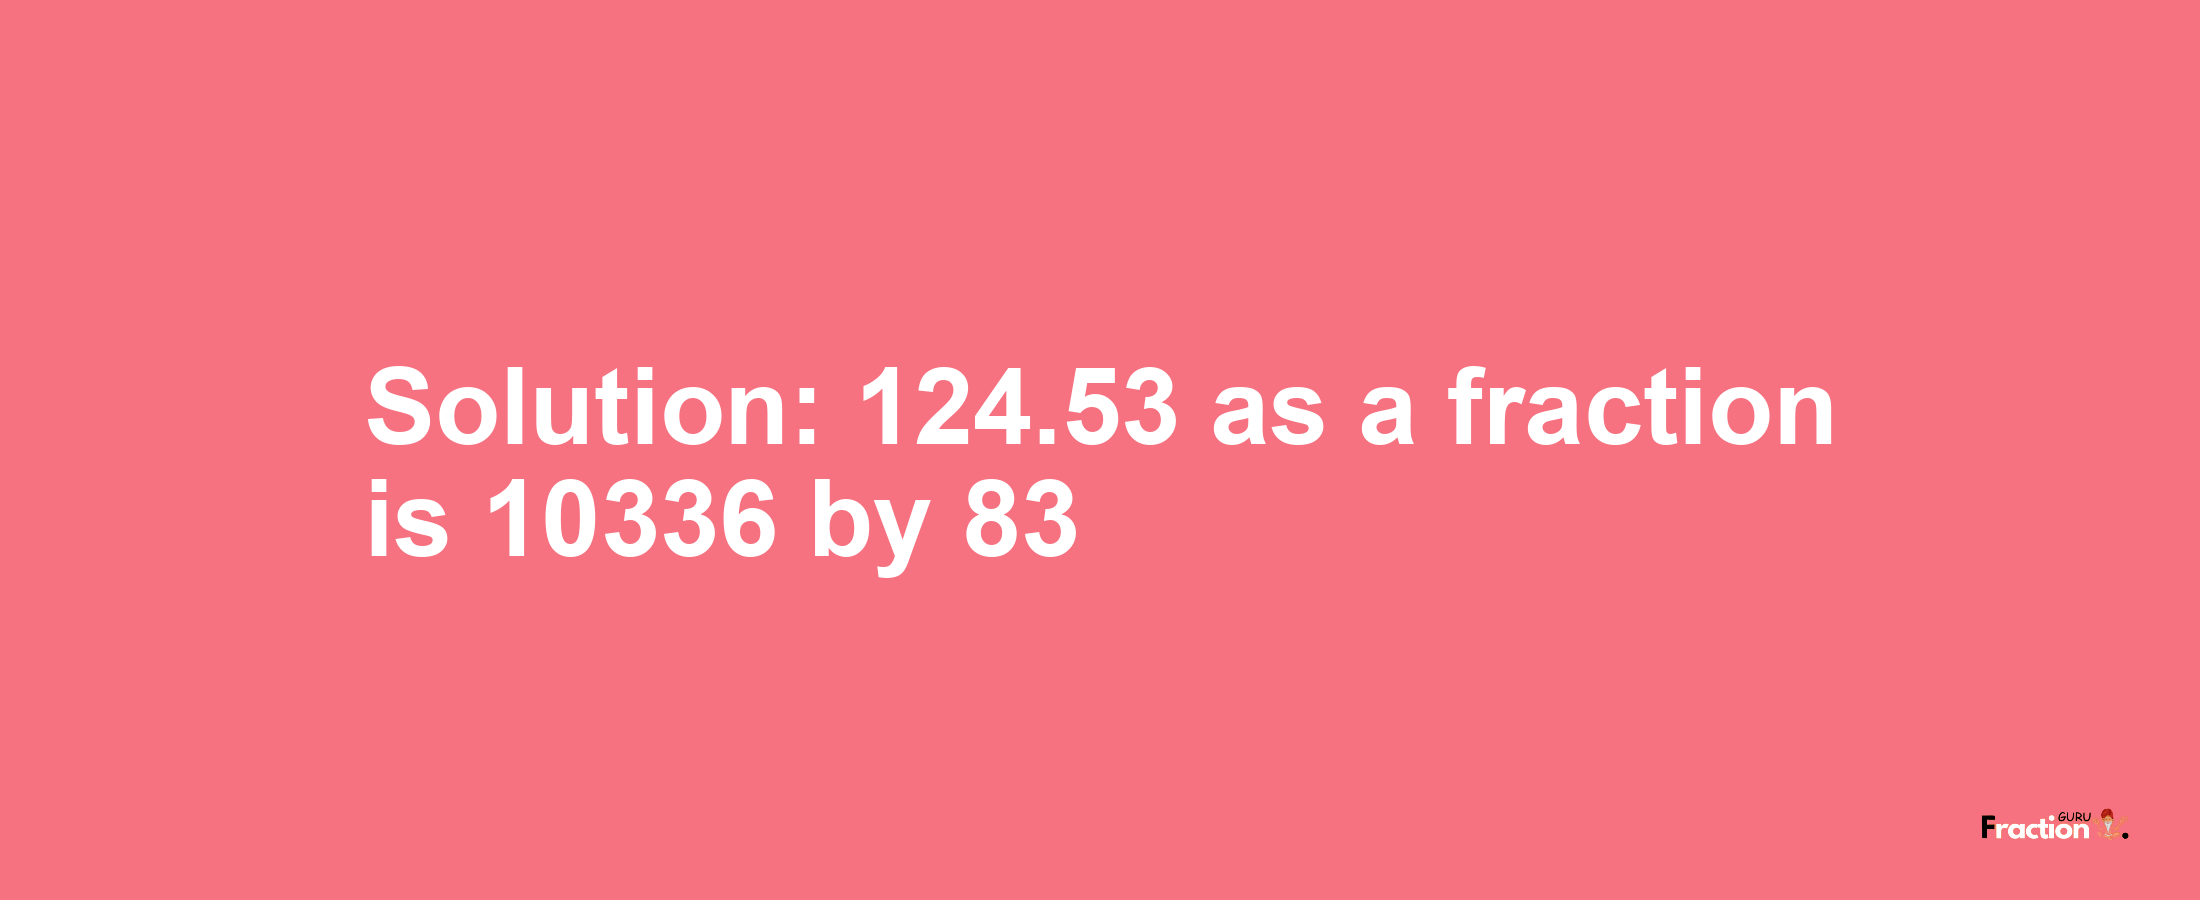 Solution:124.53 as a fraction is 10336/83